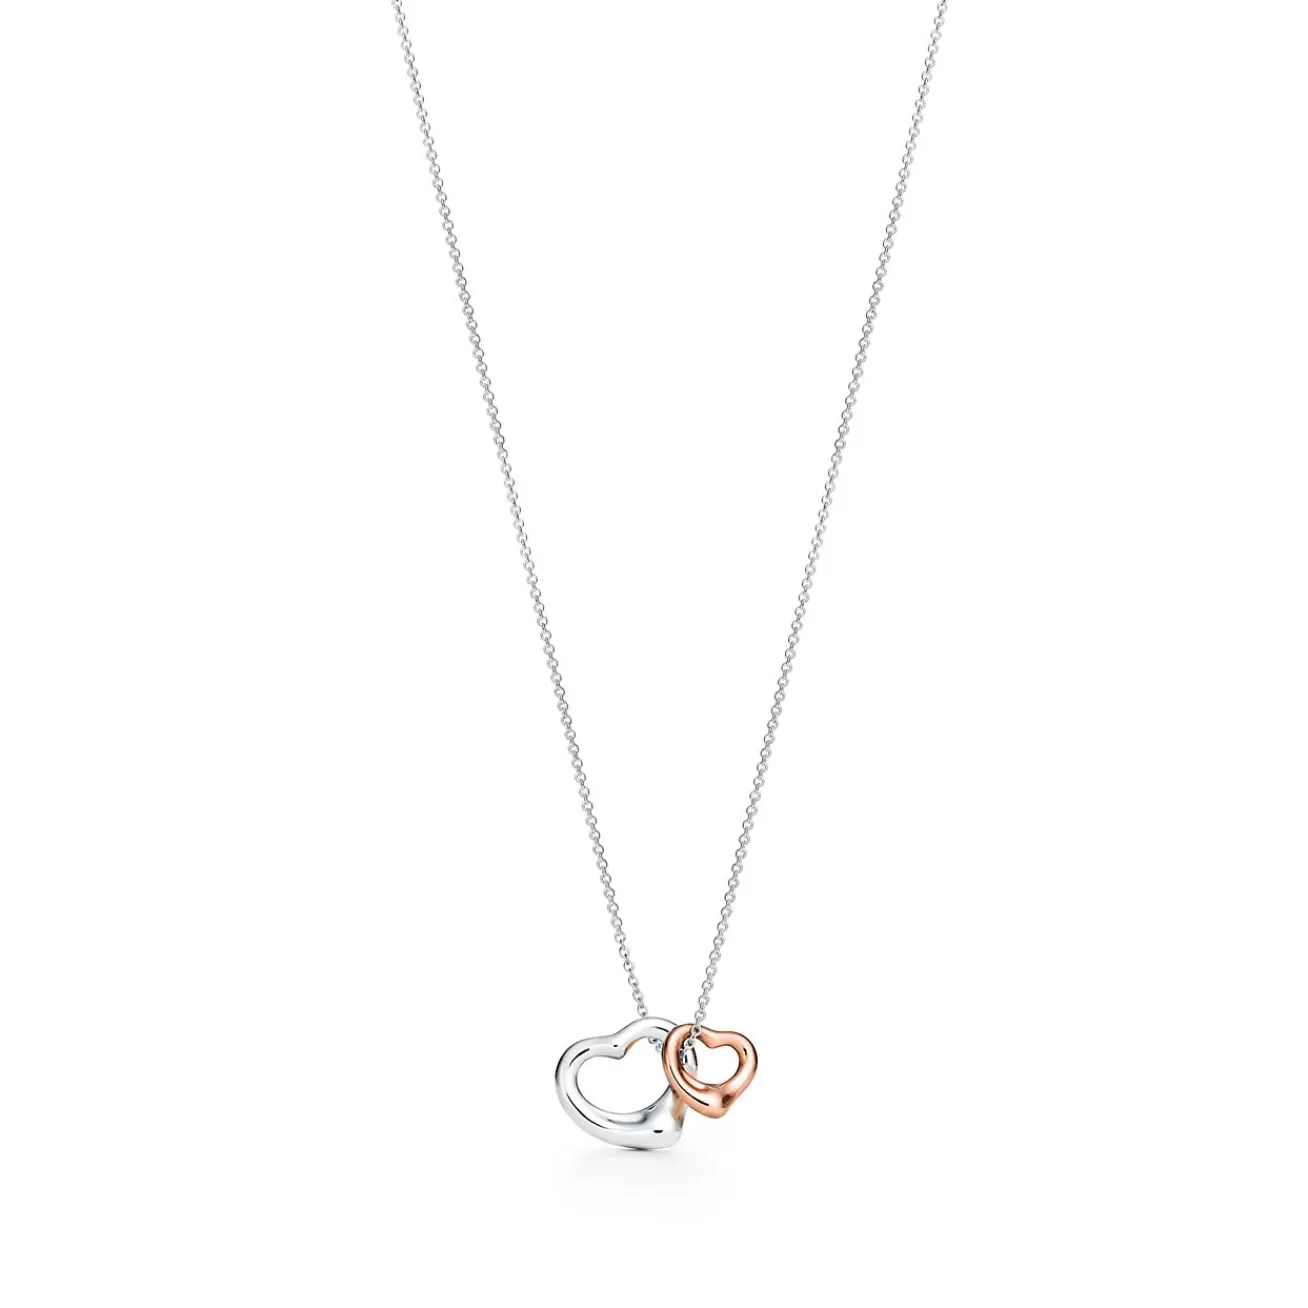 Tiffany & Co. Elsa Peretti® Open Heart pendant in silver and 18k rose gold, extra mini. | ^ Necklaces & Pendants | Gifts for Her